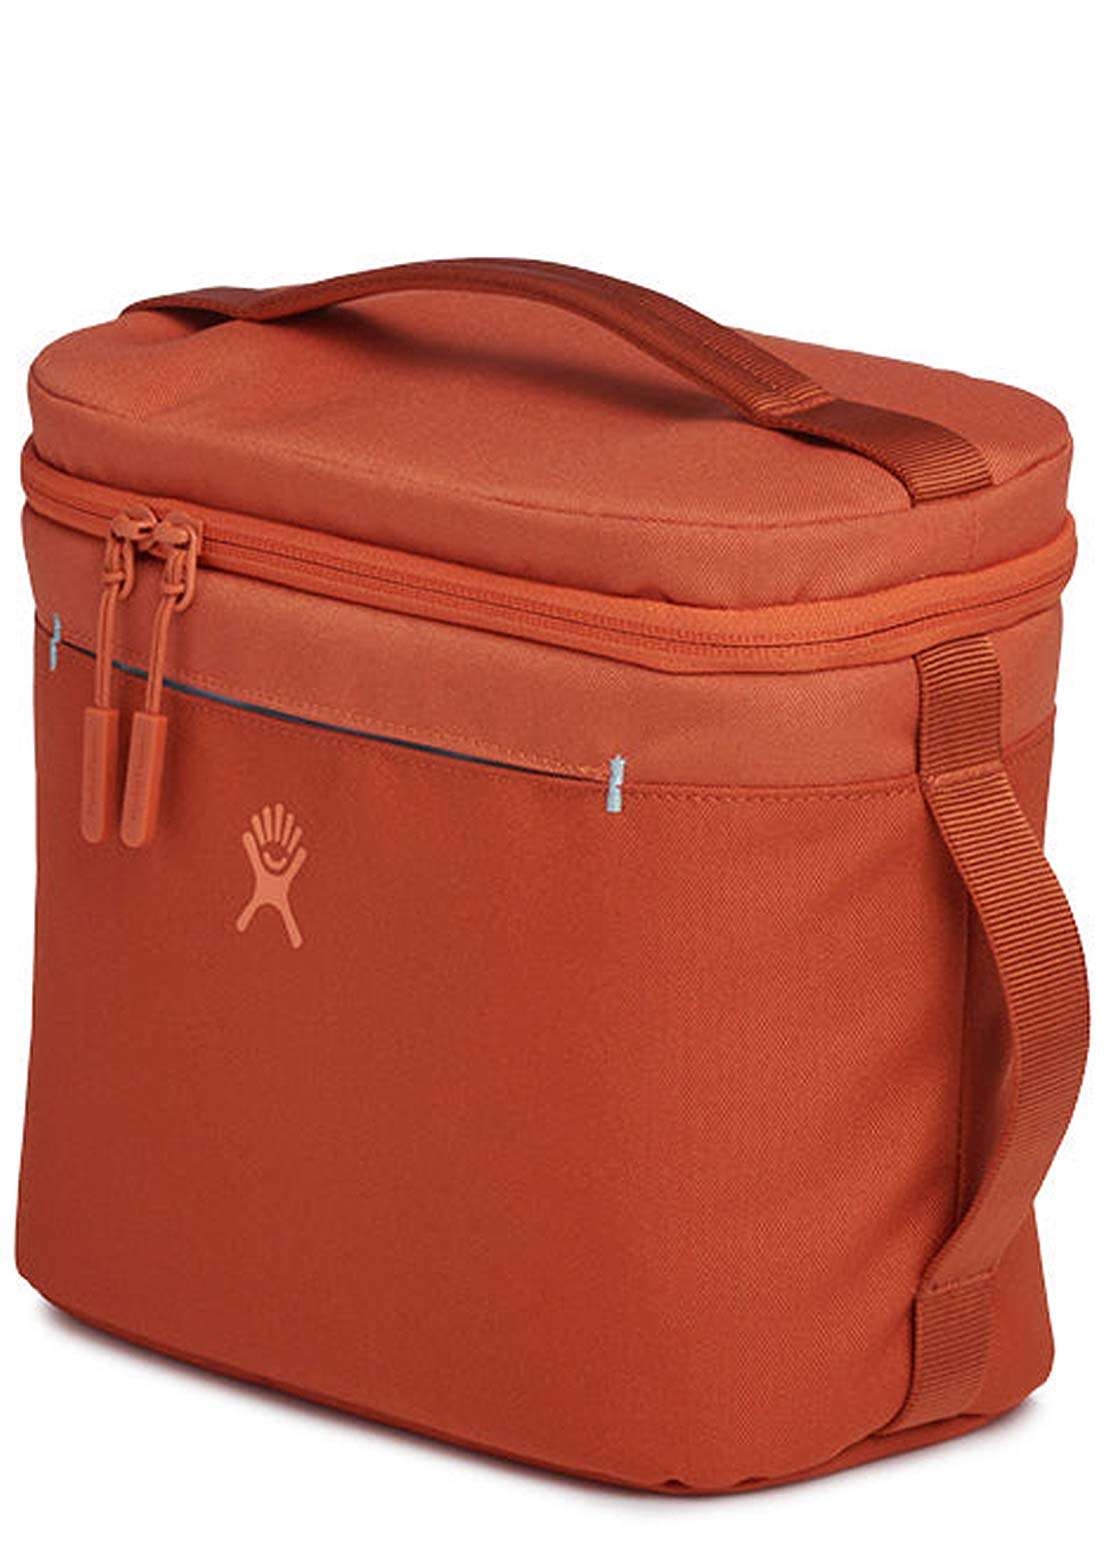 Hydro Flask 5L Insulated Lunch Bag Chili